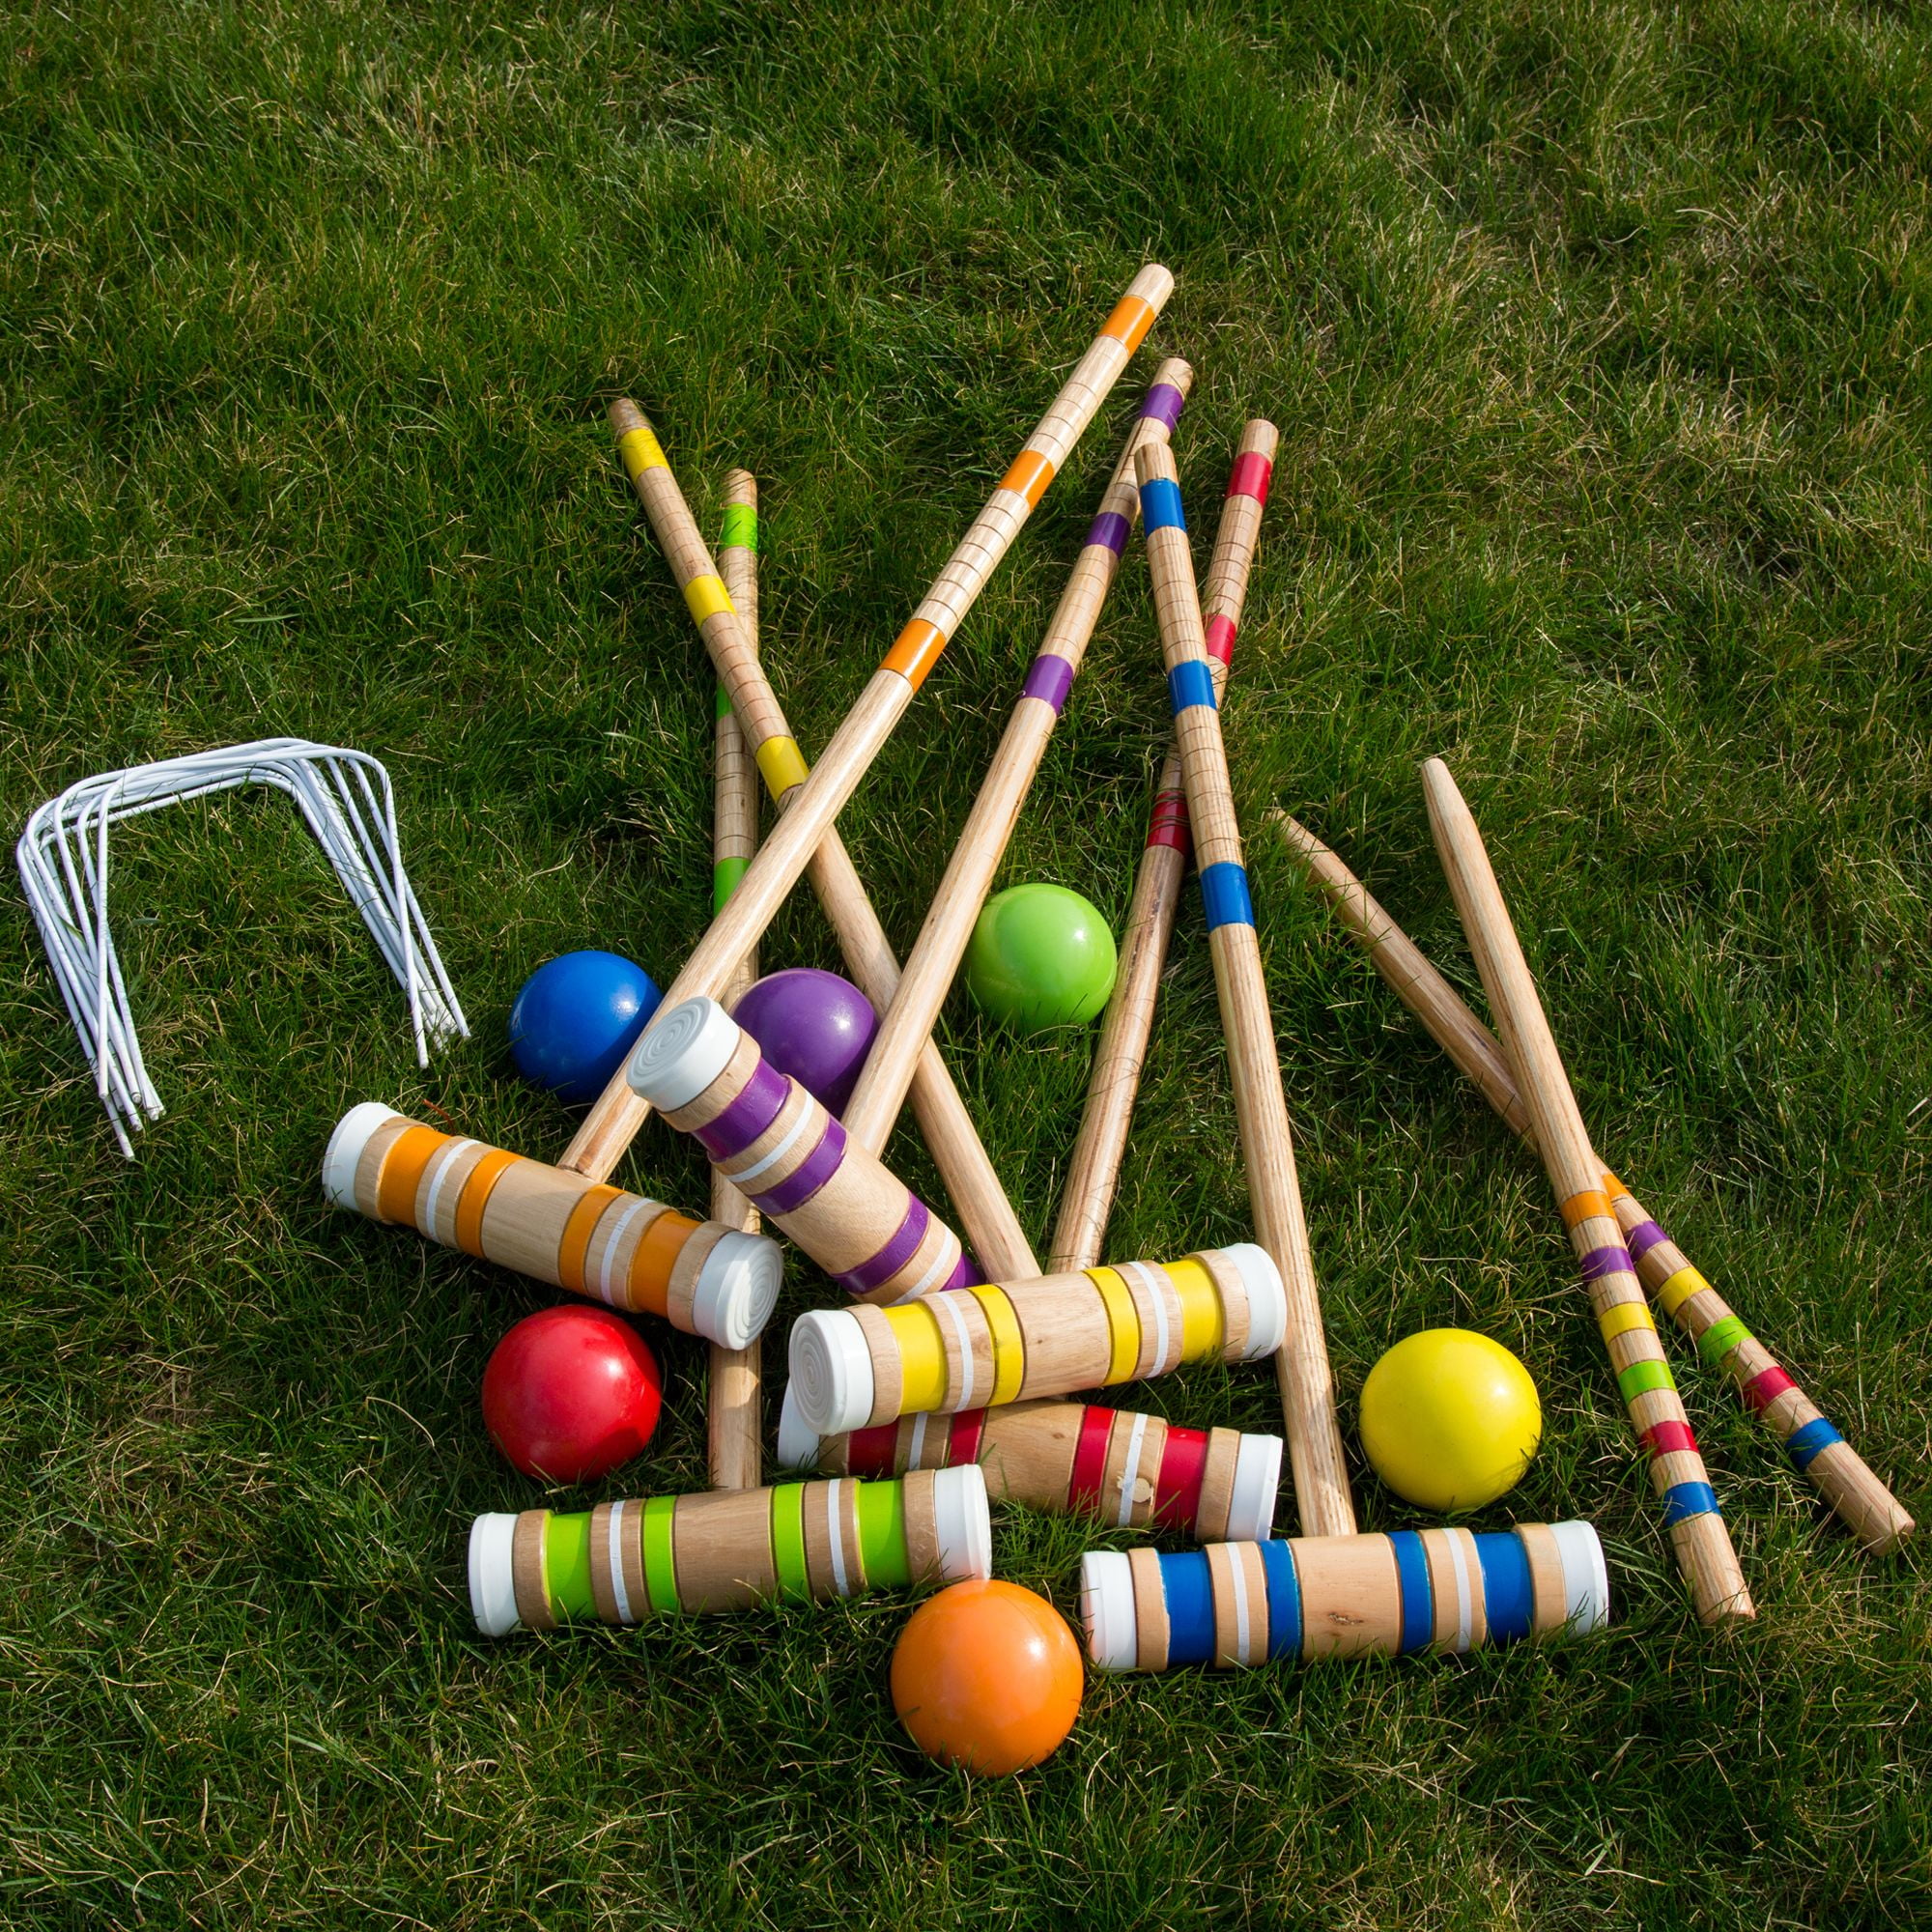 Deluxe Croquet Game Set for Family 6 Players Includes Extra Large Carrying Bag 31-Inch LULULION Croquet Set for Kids and Adults Durable Hardwood Material 